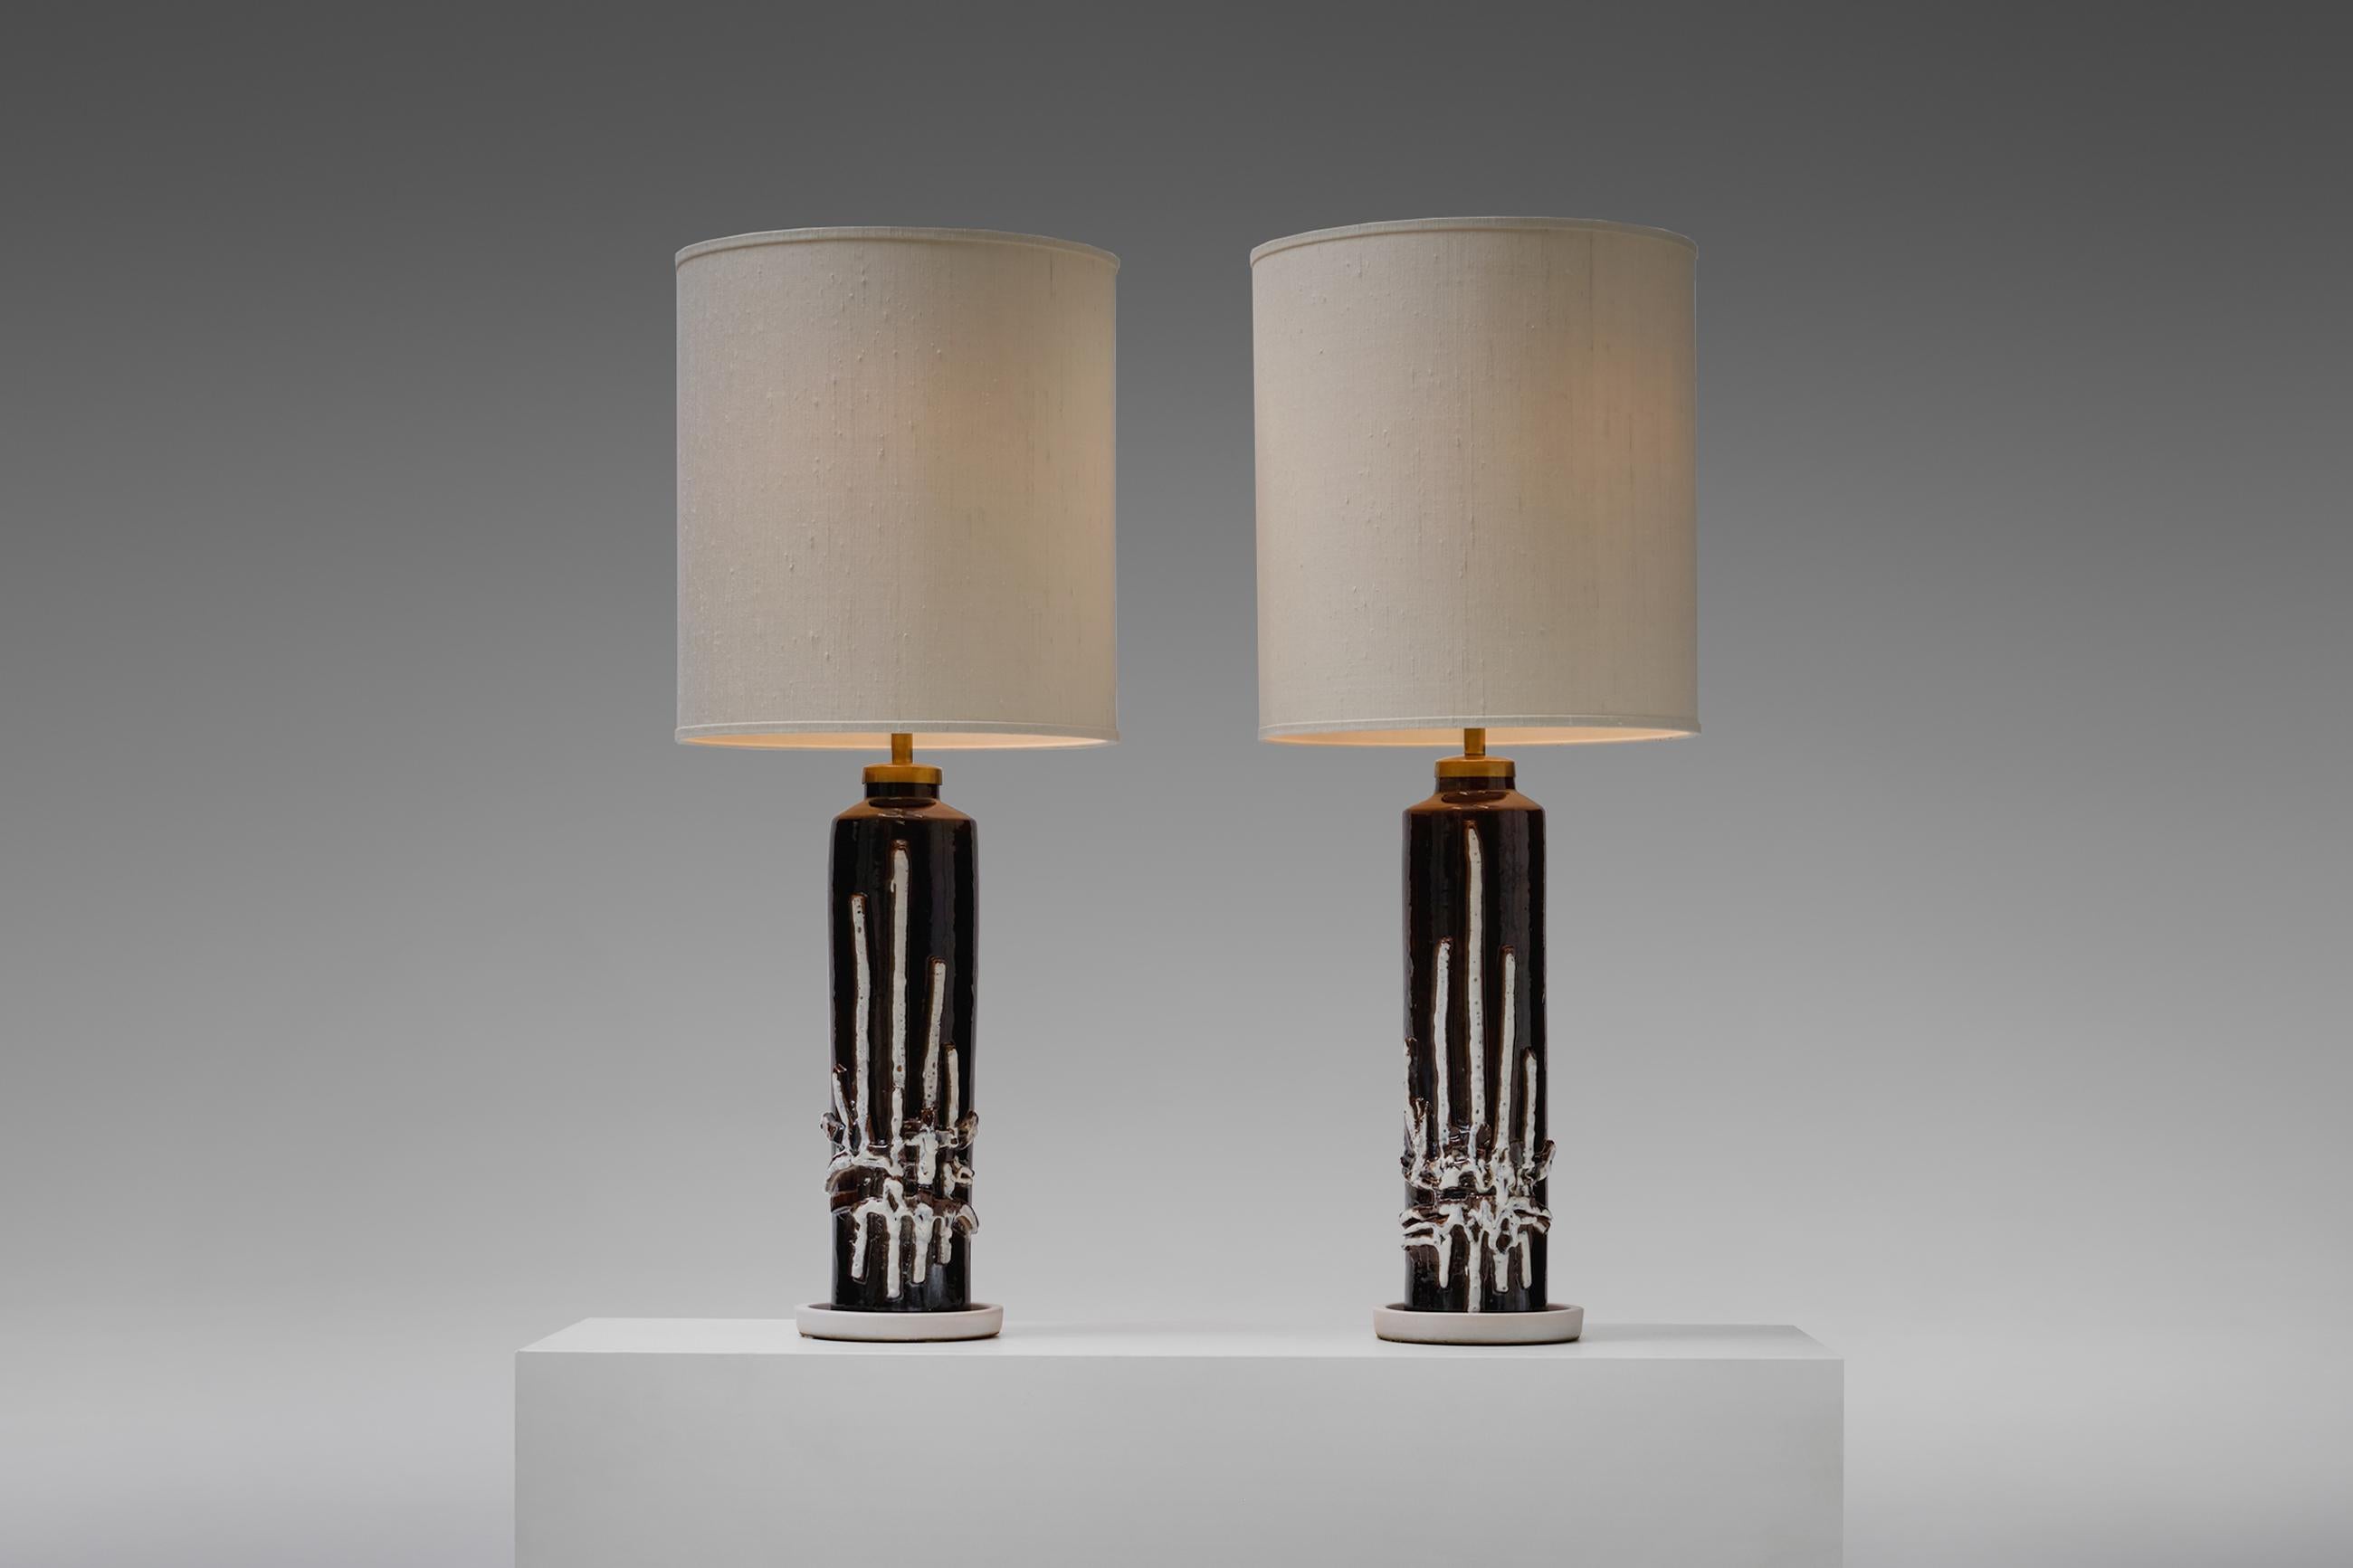 Outspoken set of two large Brutalist ceramic table lamps, Italy, 1960s. Impressive monumental in size with an artistic decoration. The bases have a great glaze finish, the brown / deep eggplant colored base has an almost oil like finish which